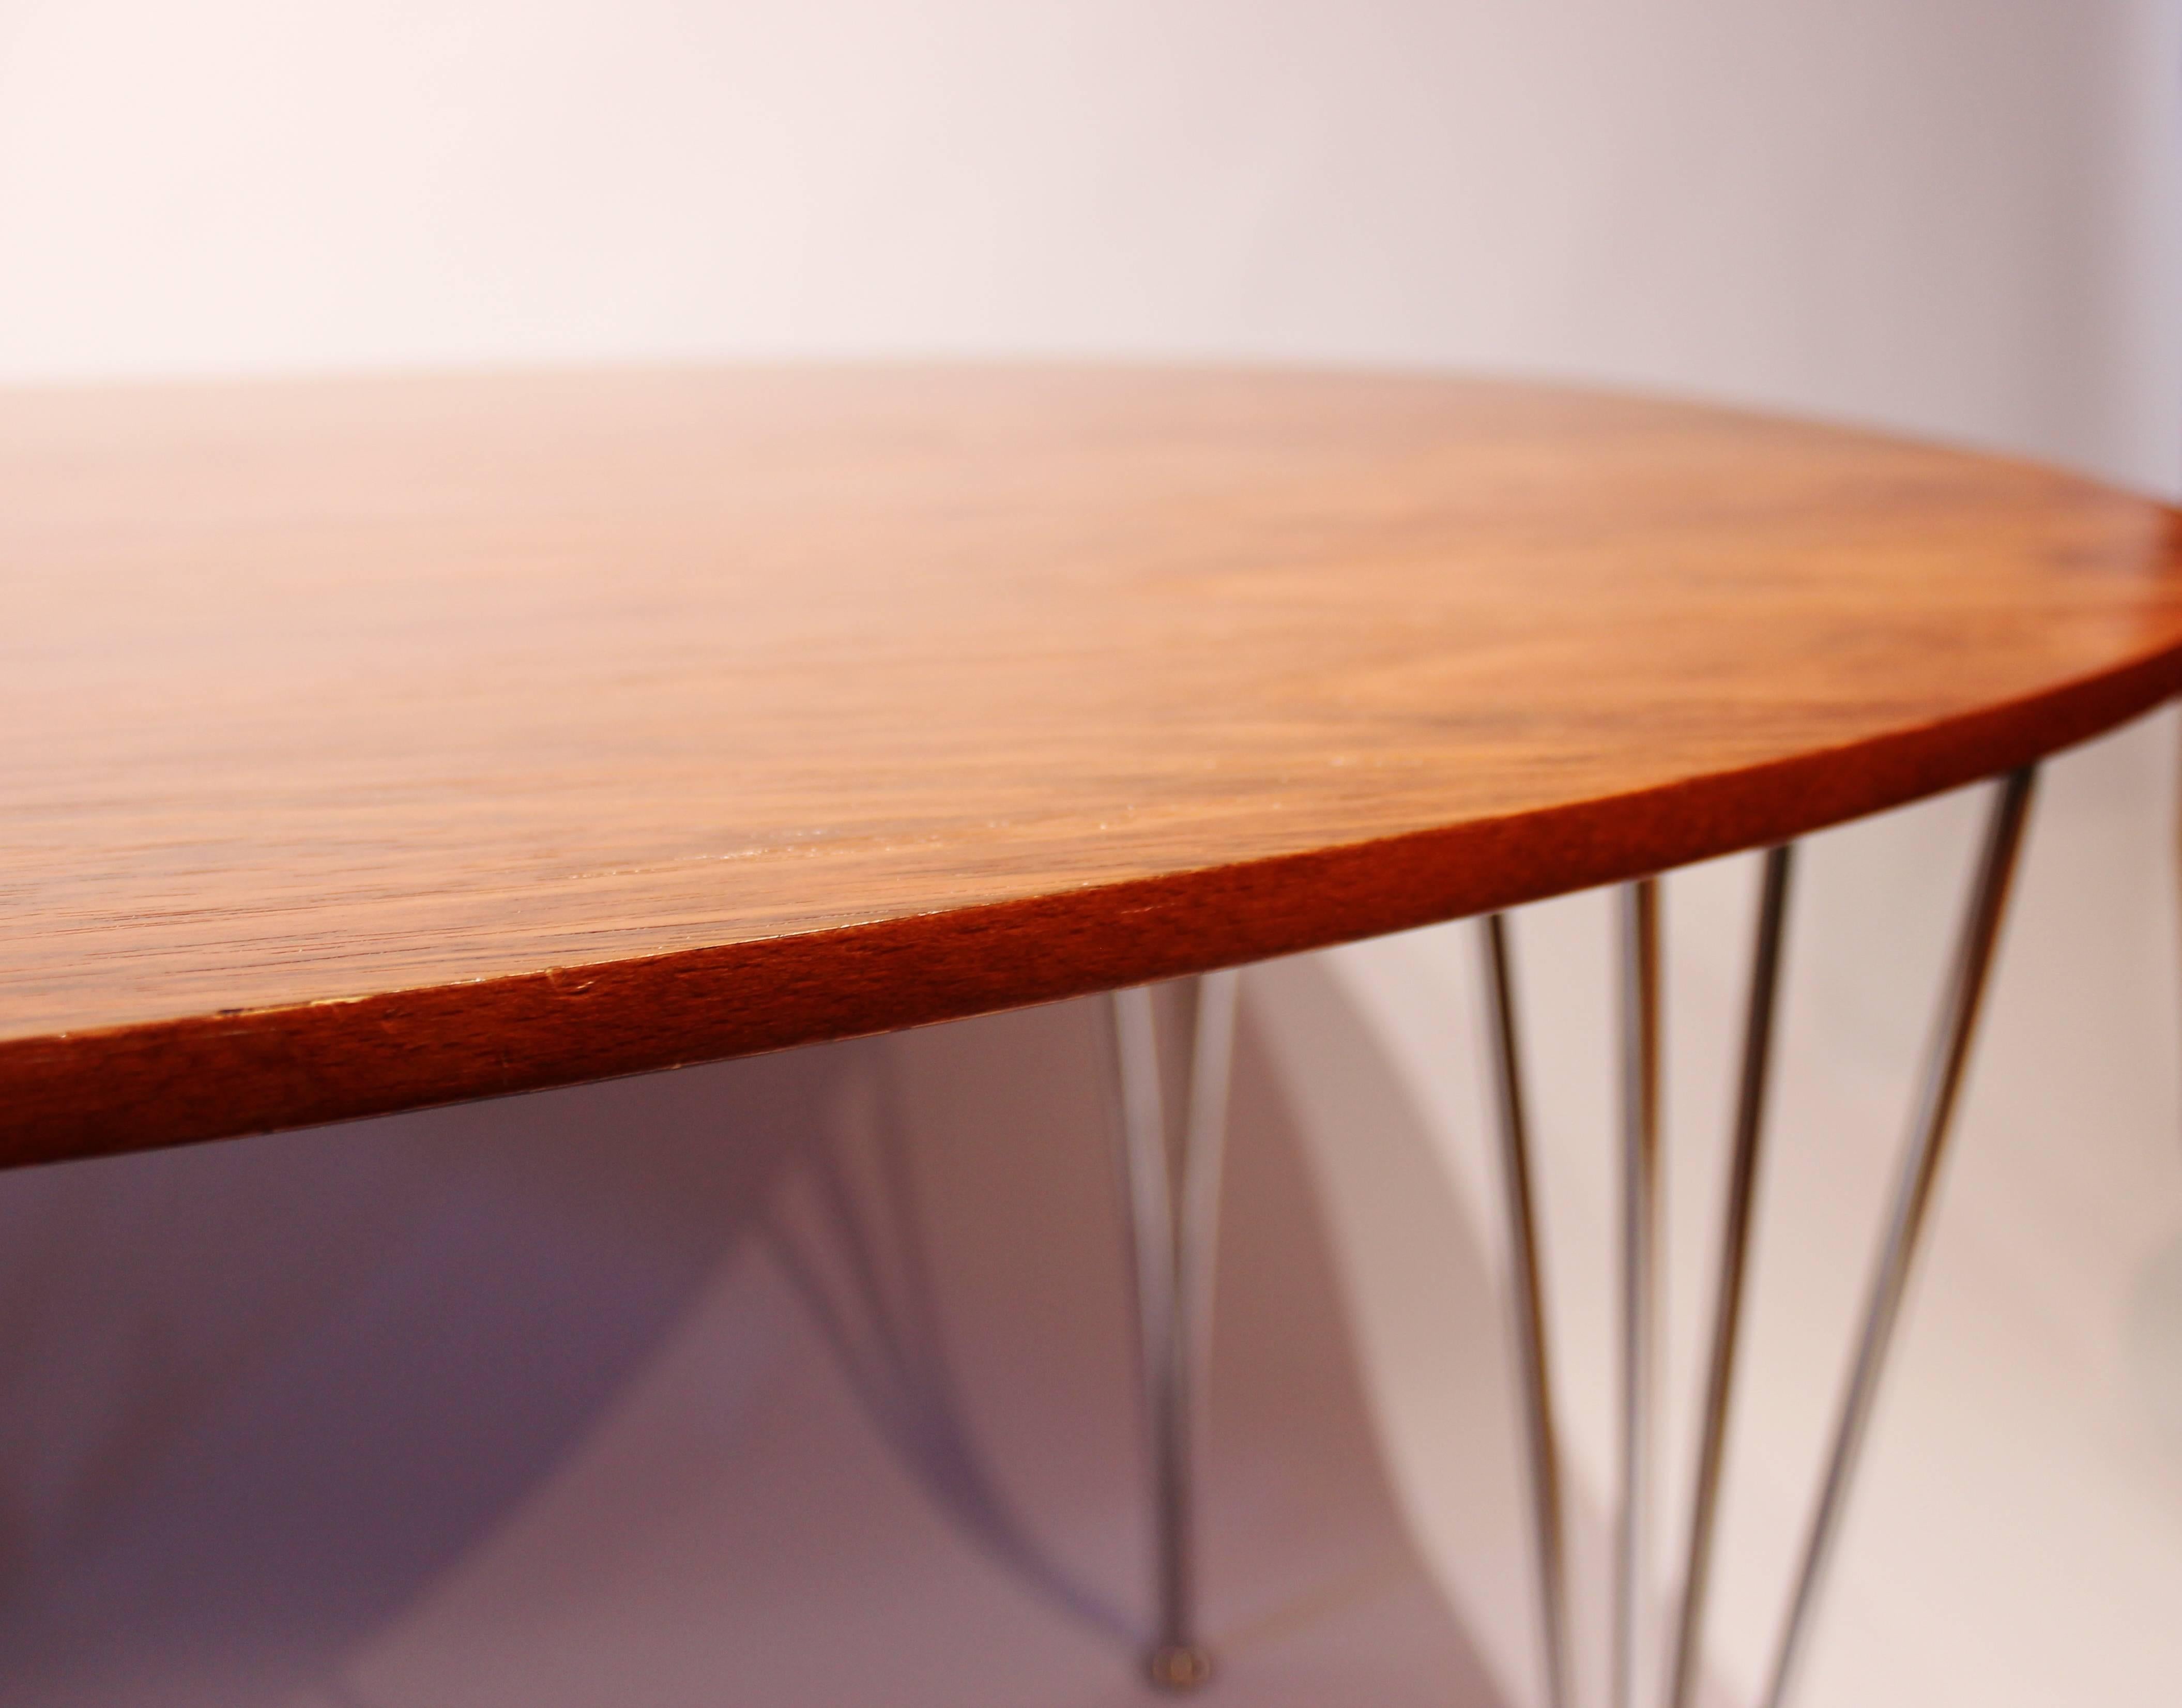 Super Ellipse Table in Rosewood by Piet Hein, Arne Jacobsen and Bruno Mathsson 1